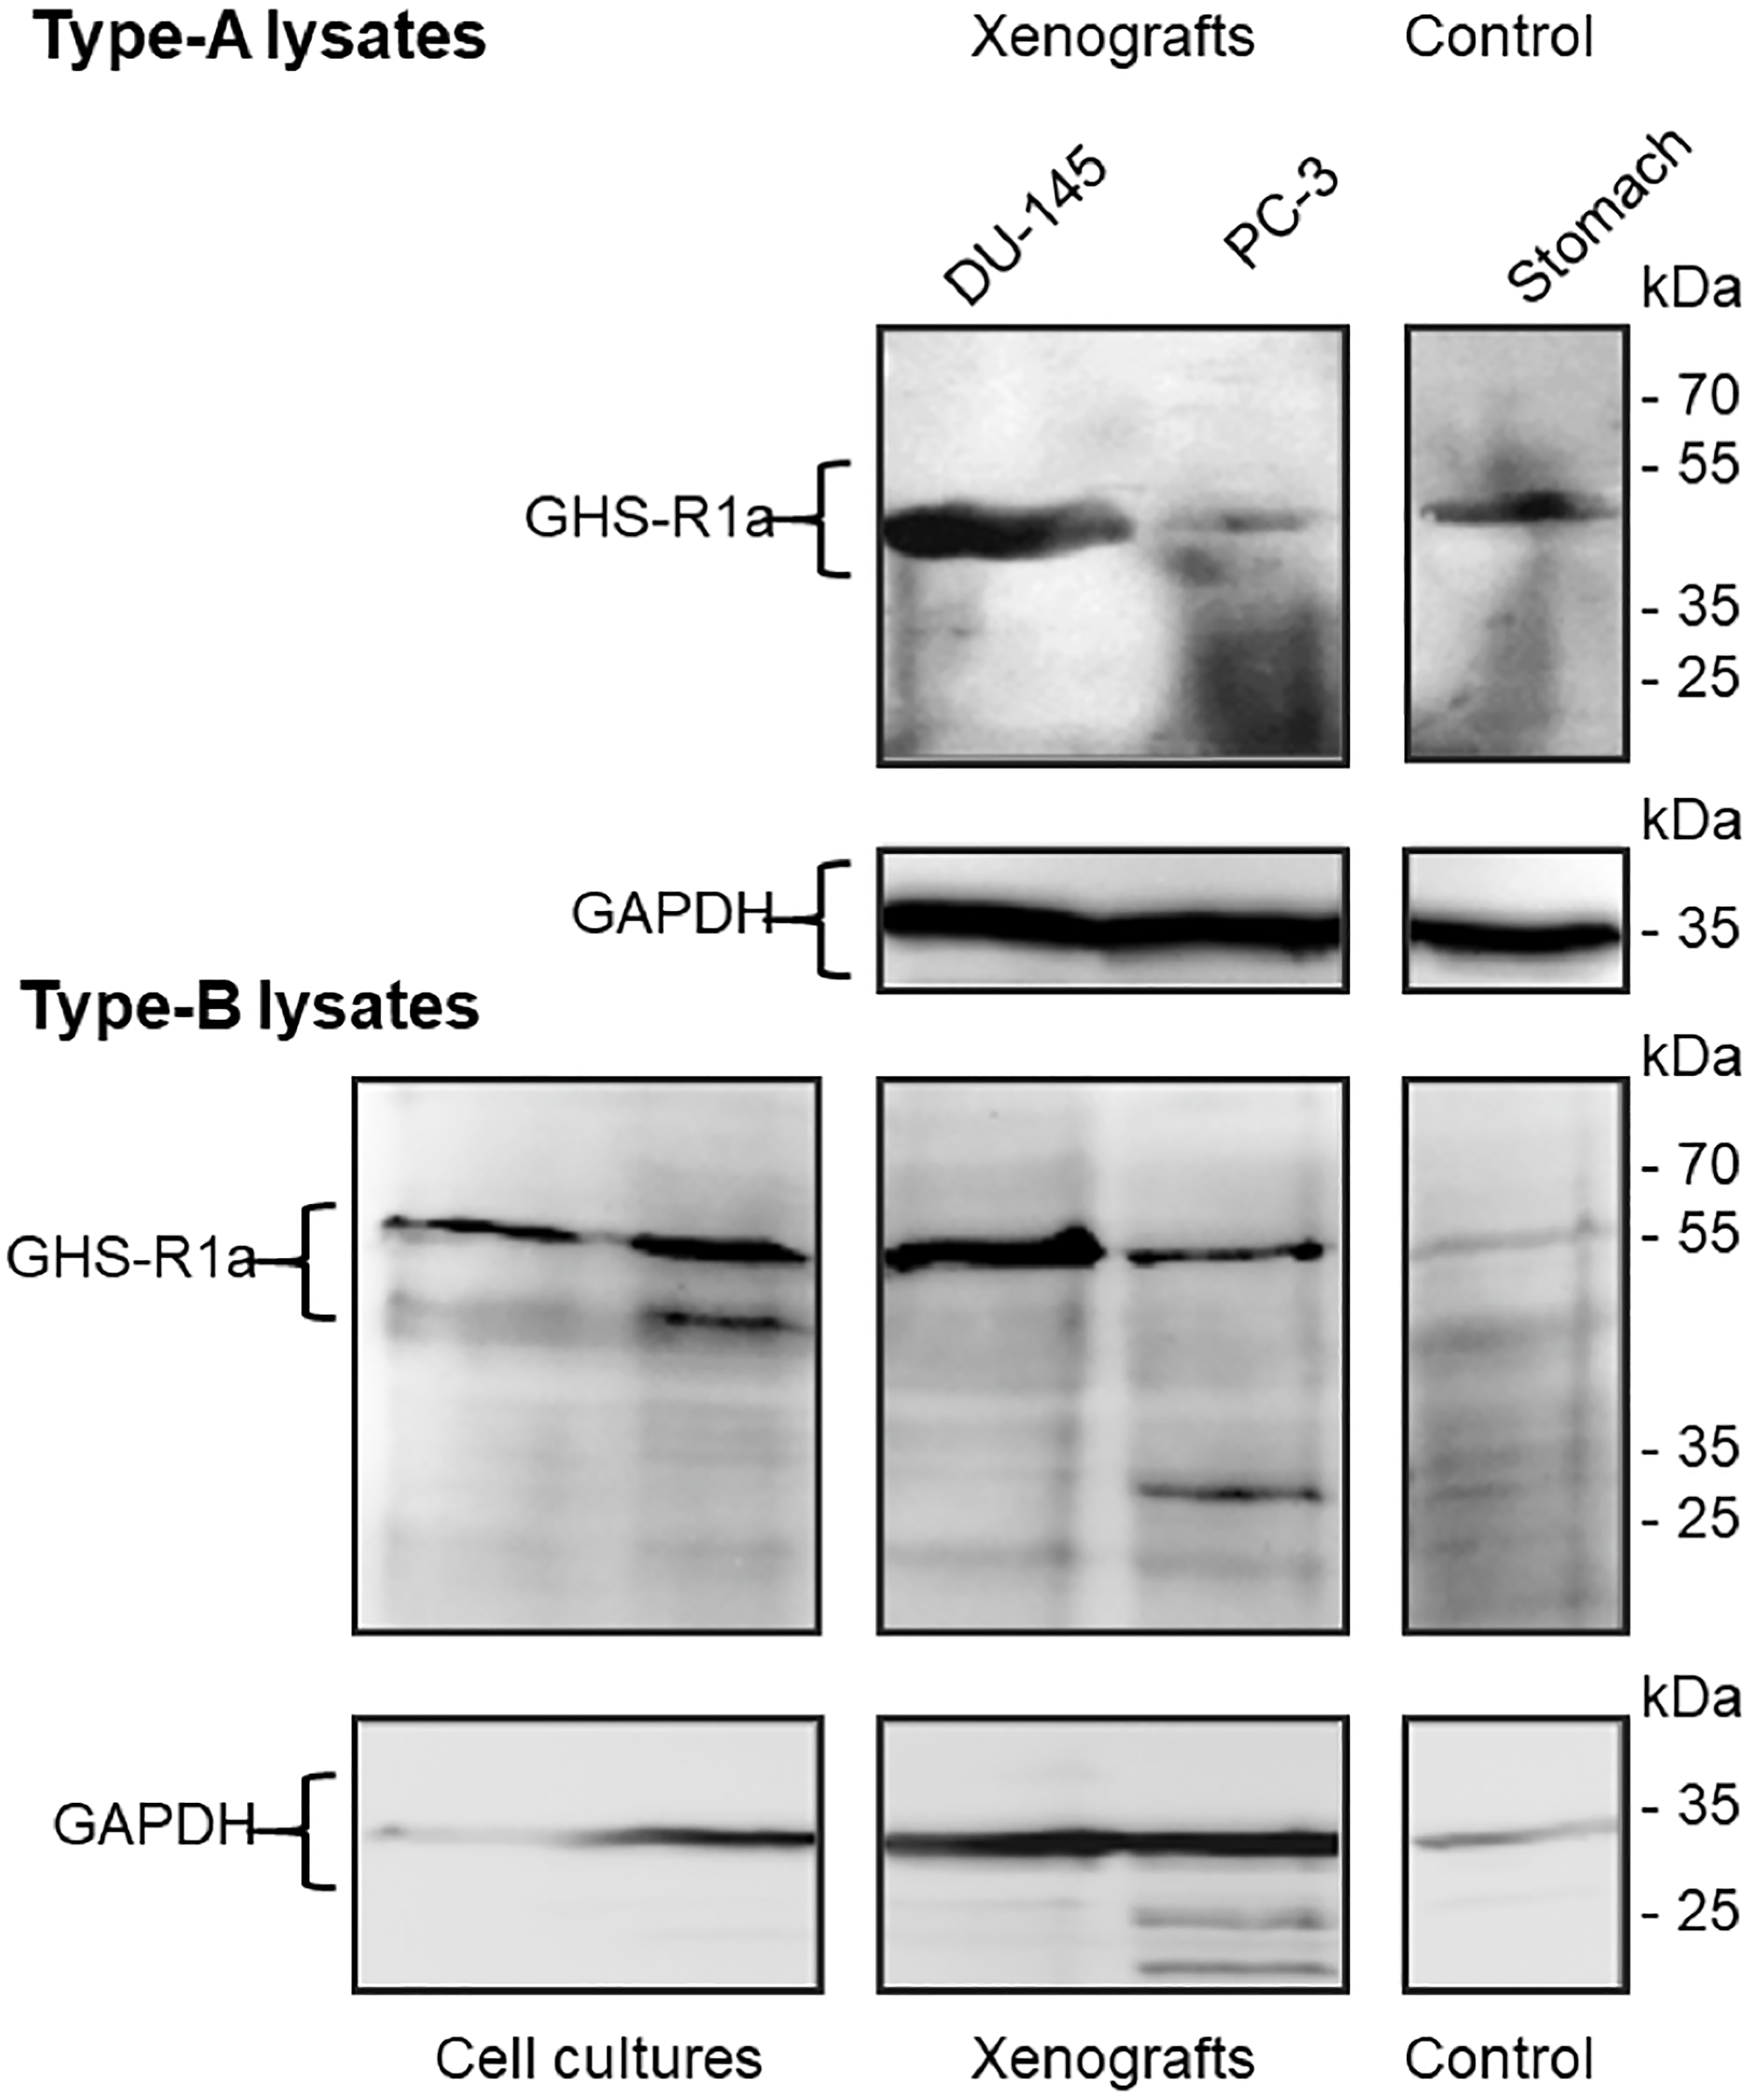 Immunoblots of GHS-R1a in lysates of DU-145 and PC-3 cell cultures, xenografts and Control.